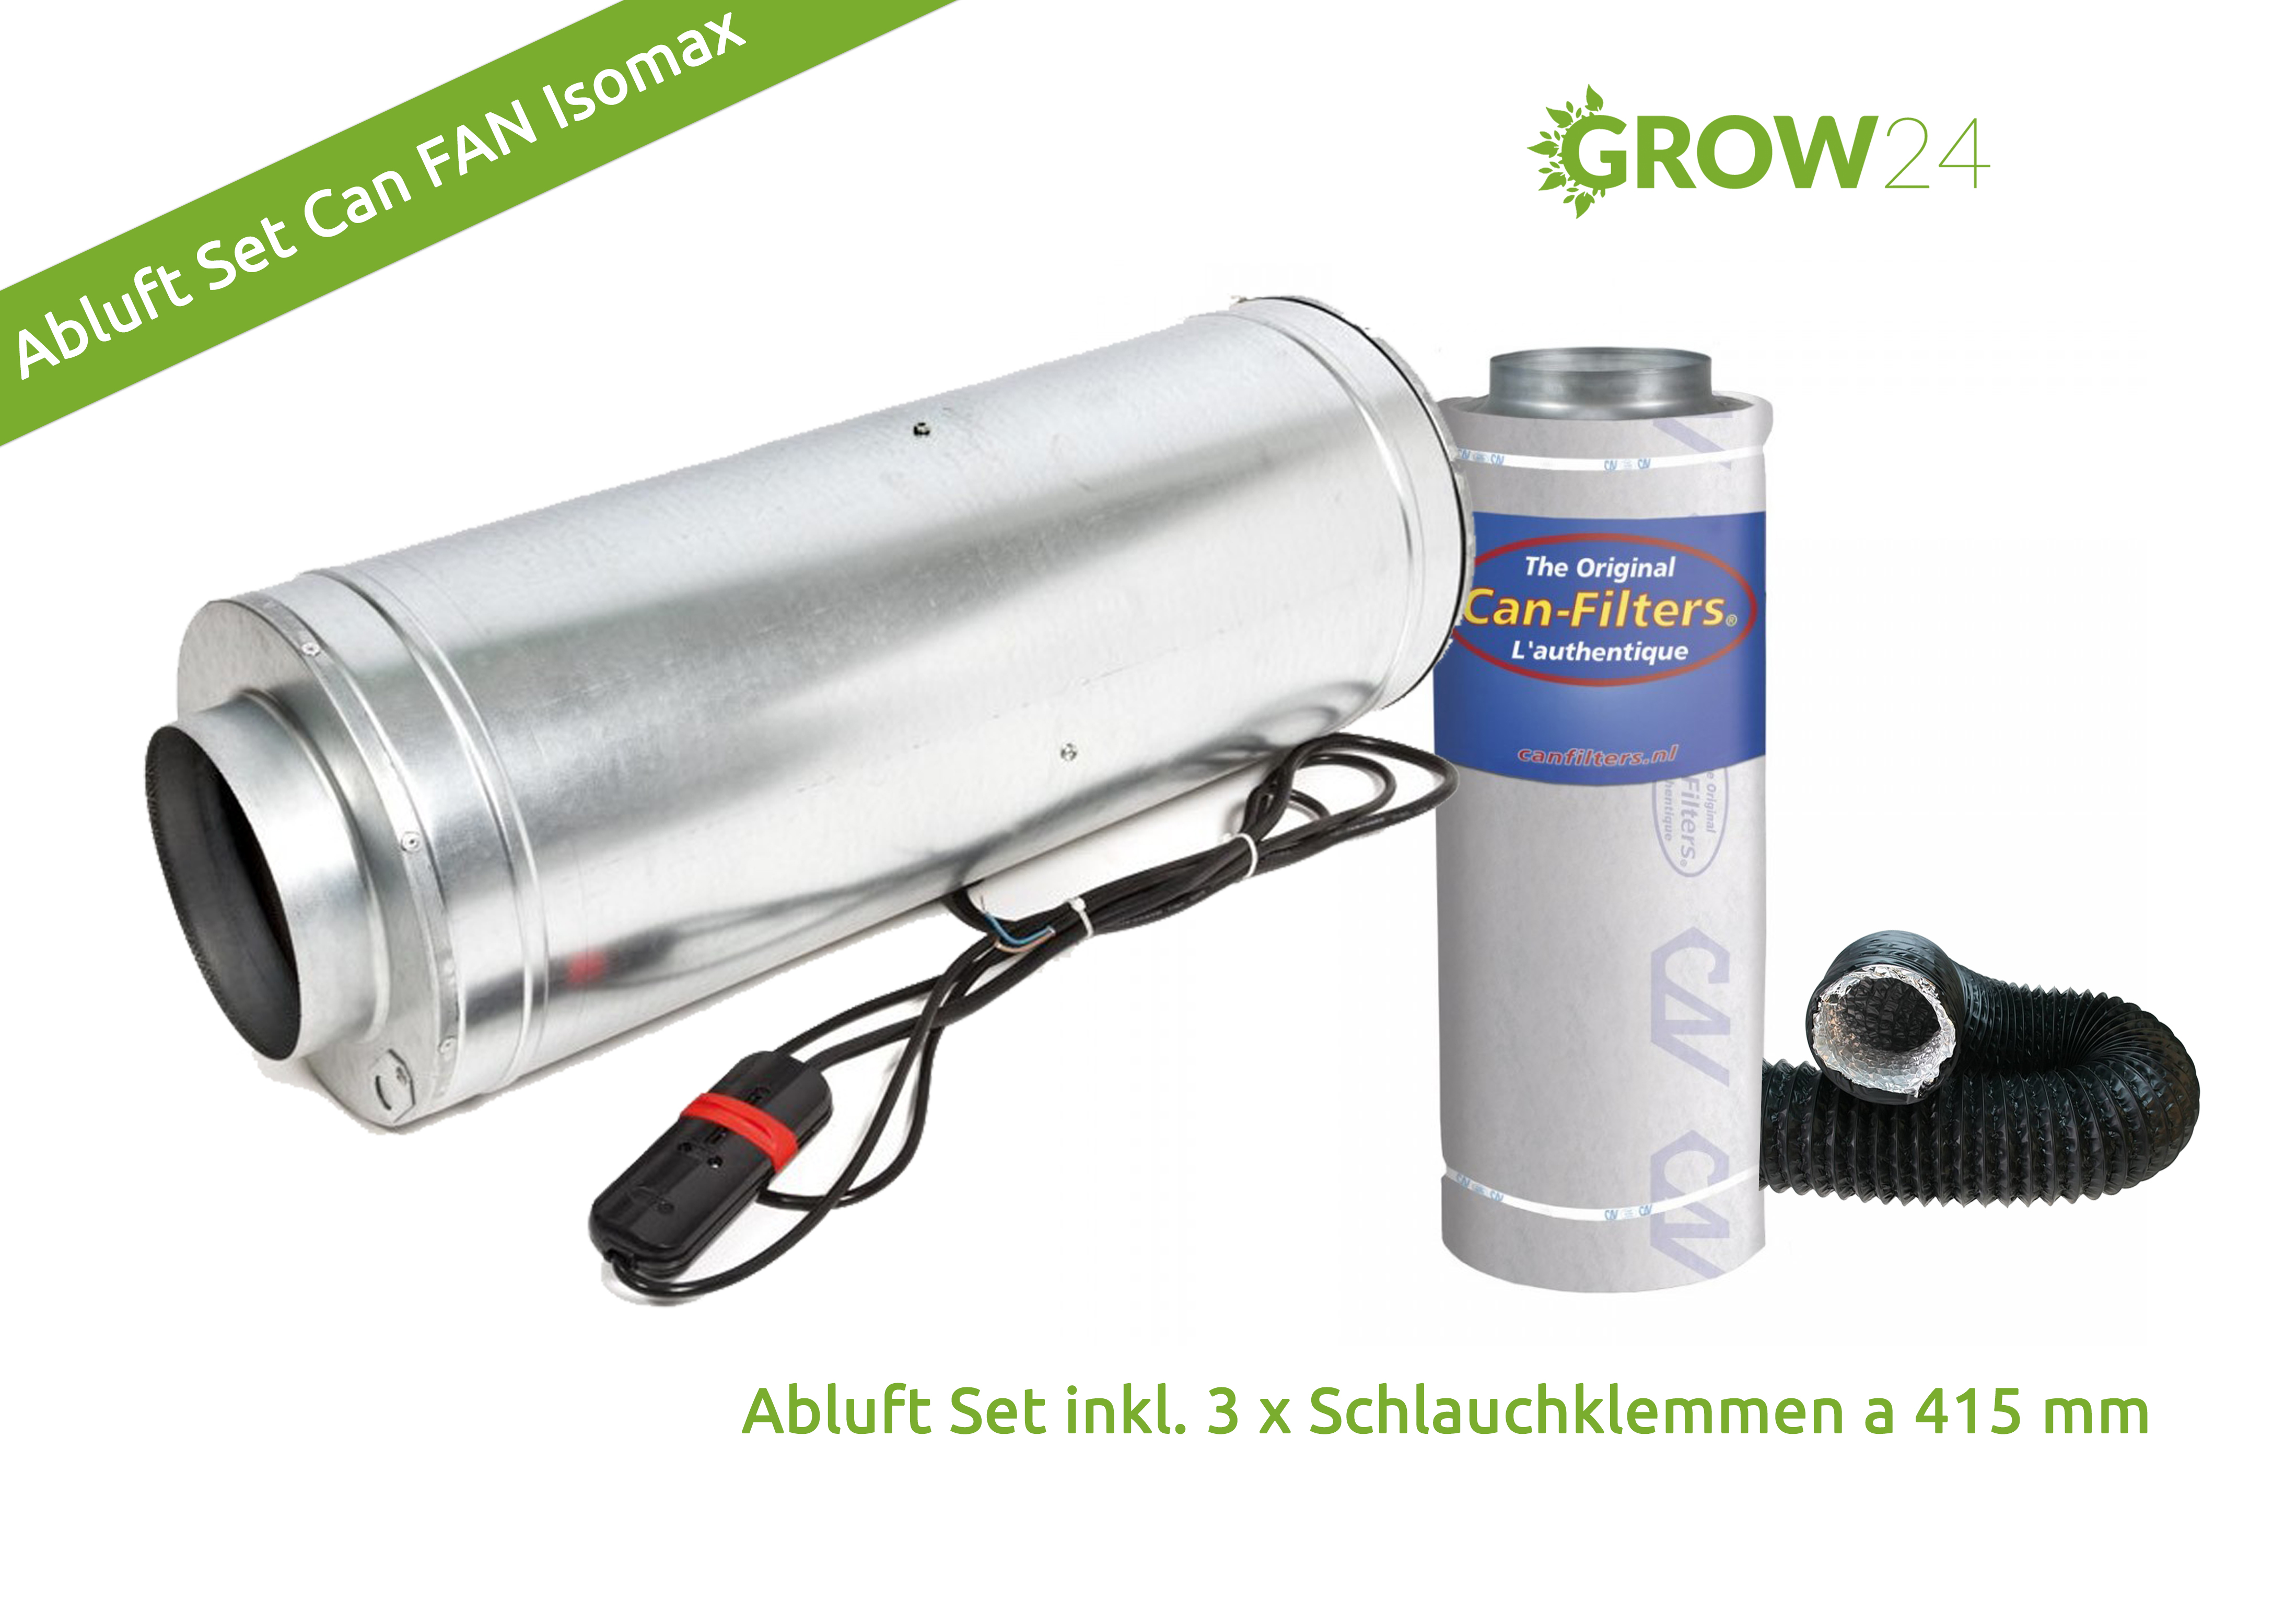 Abluft Set Can Fan Isomax Industrie